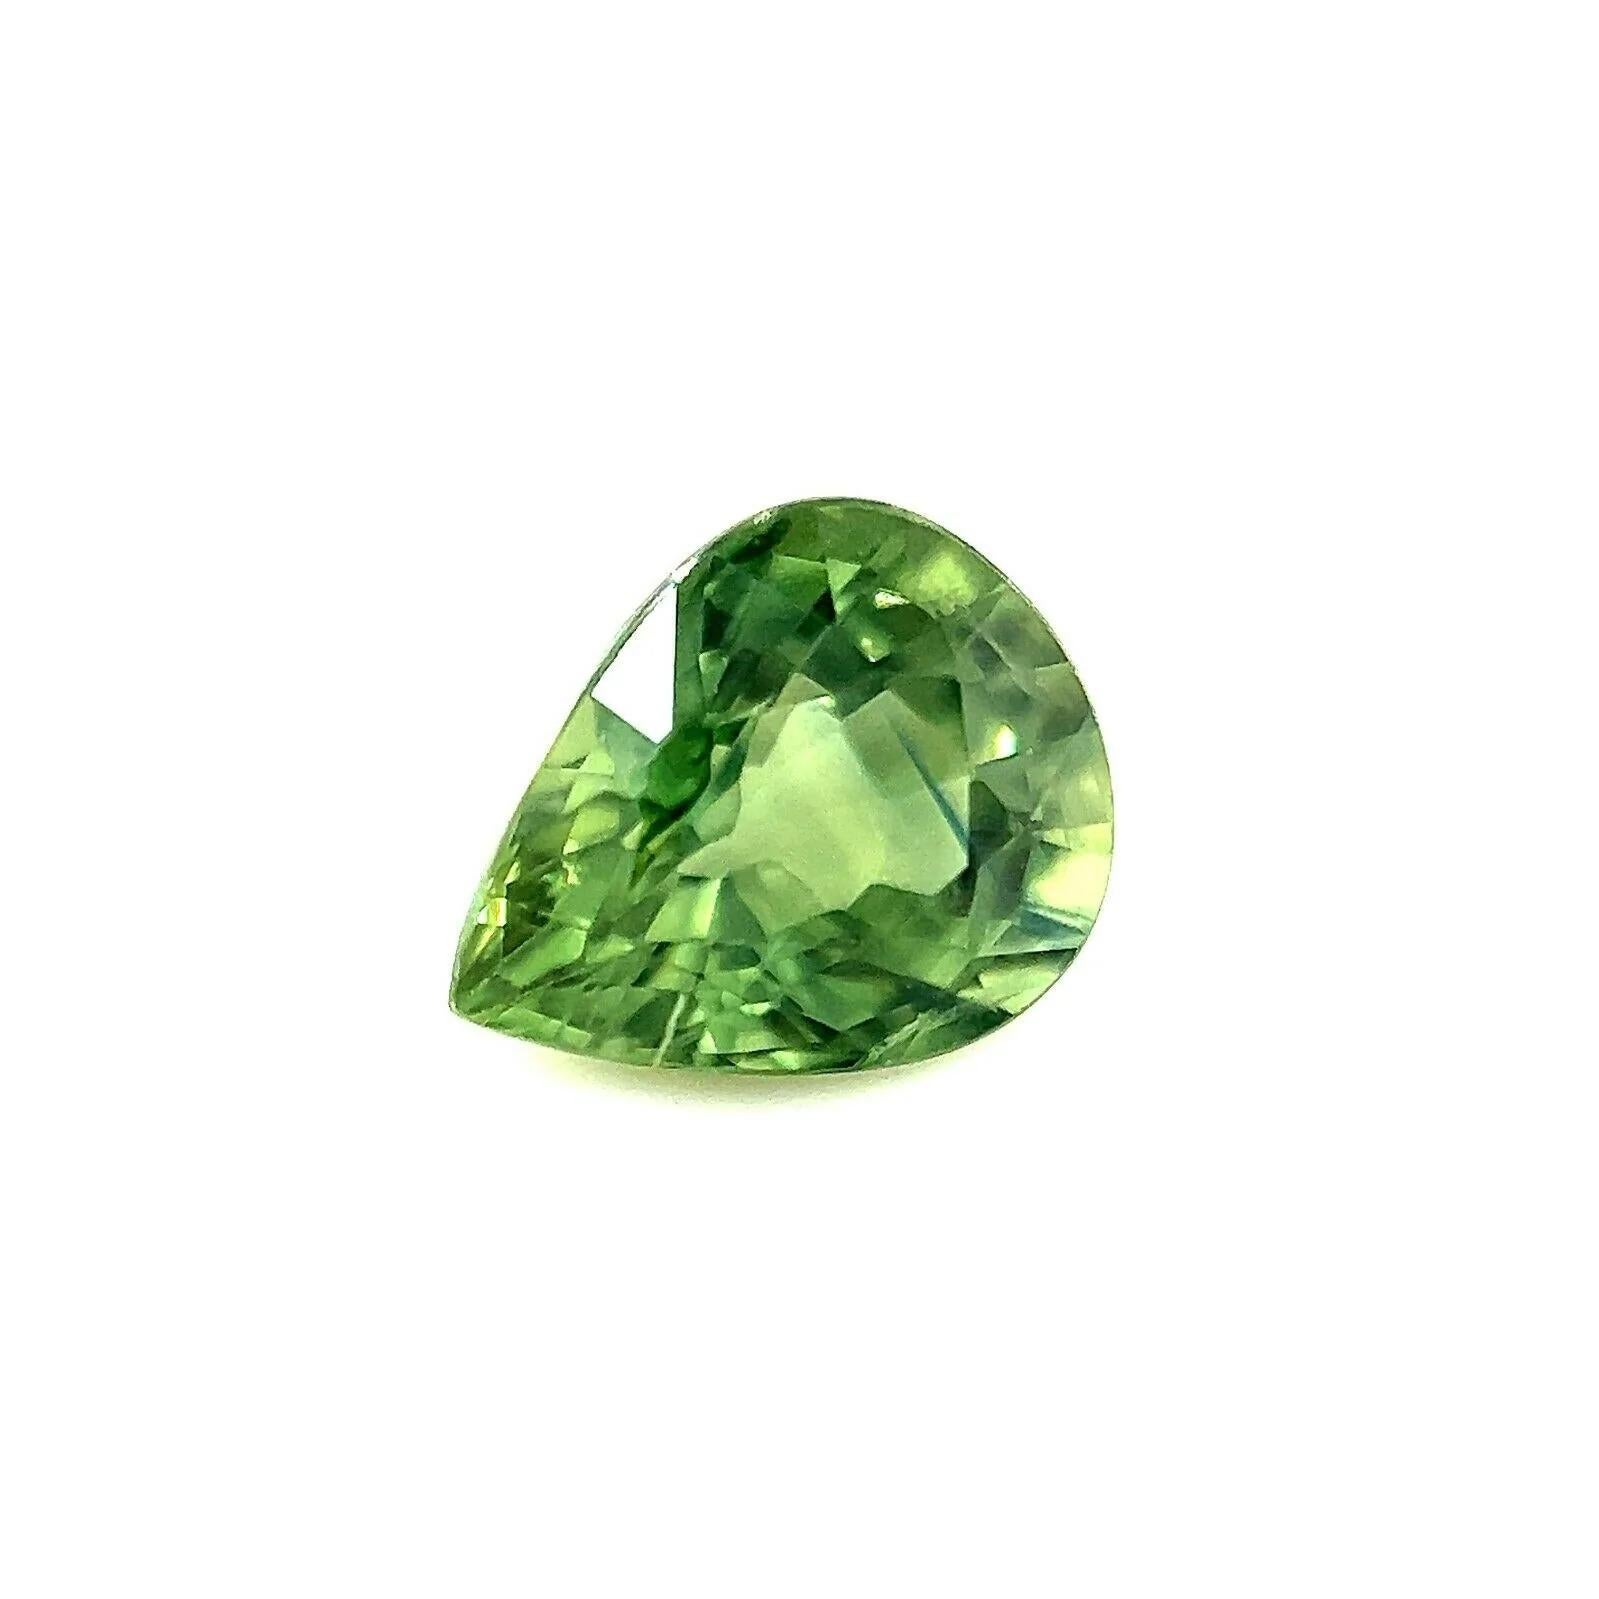 Fine 1.27ct Vivid Green Australian Sapphire Pear Teardrop Cut Gem 7.2x5.8mm

Fine Natural Green Australian Sapphire Pear Cut Gemstone.
1.27 Carat with a beautiful and unique green colour and excellent clarity. Also has an excellent pear cut and